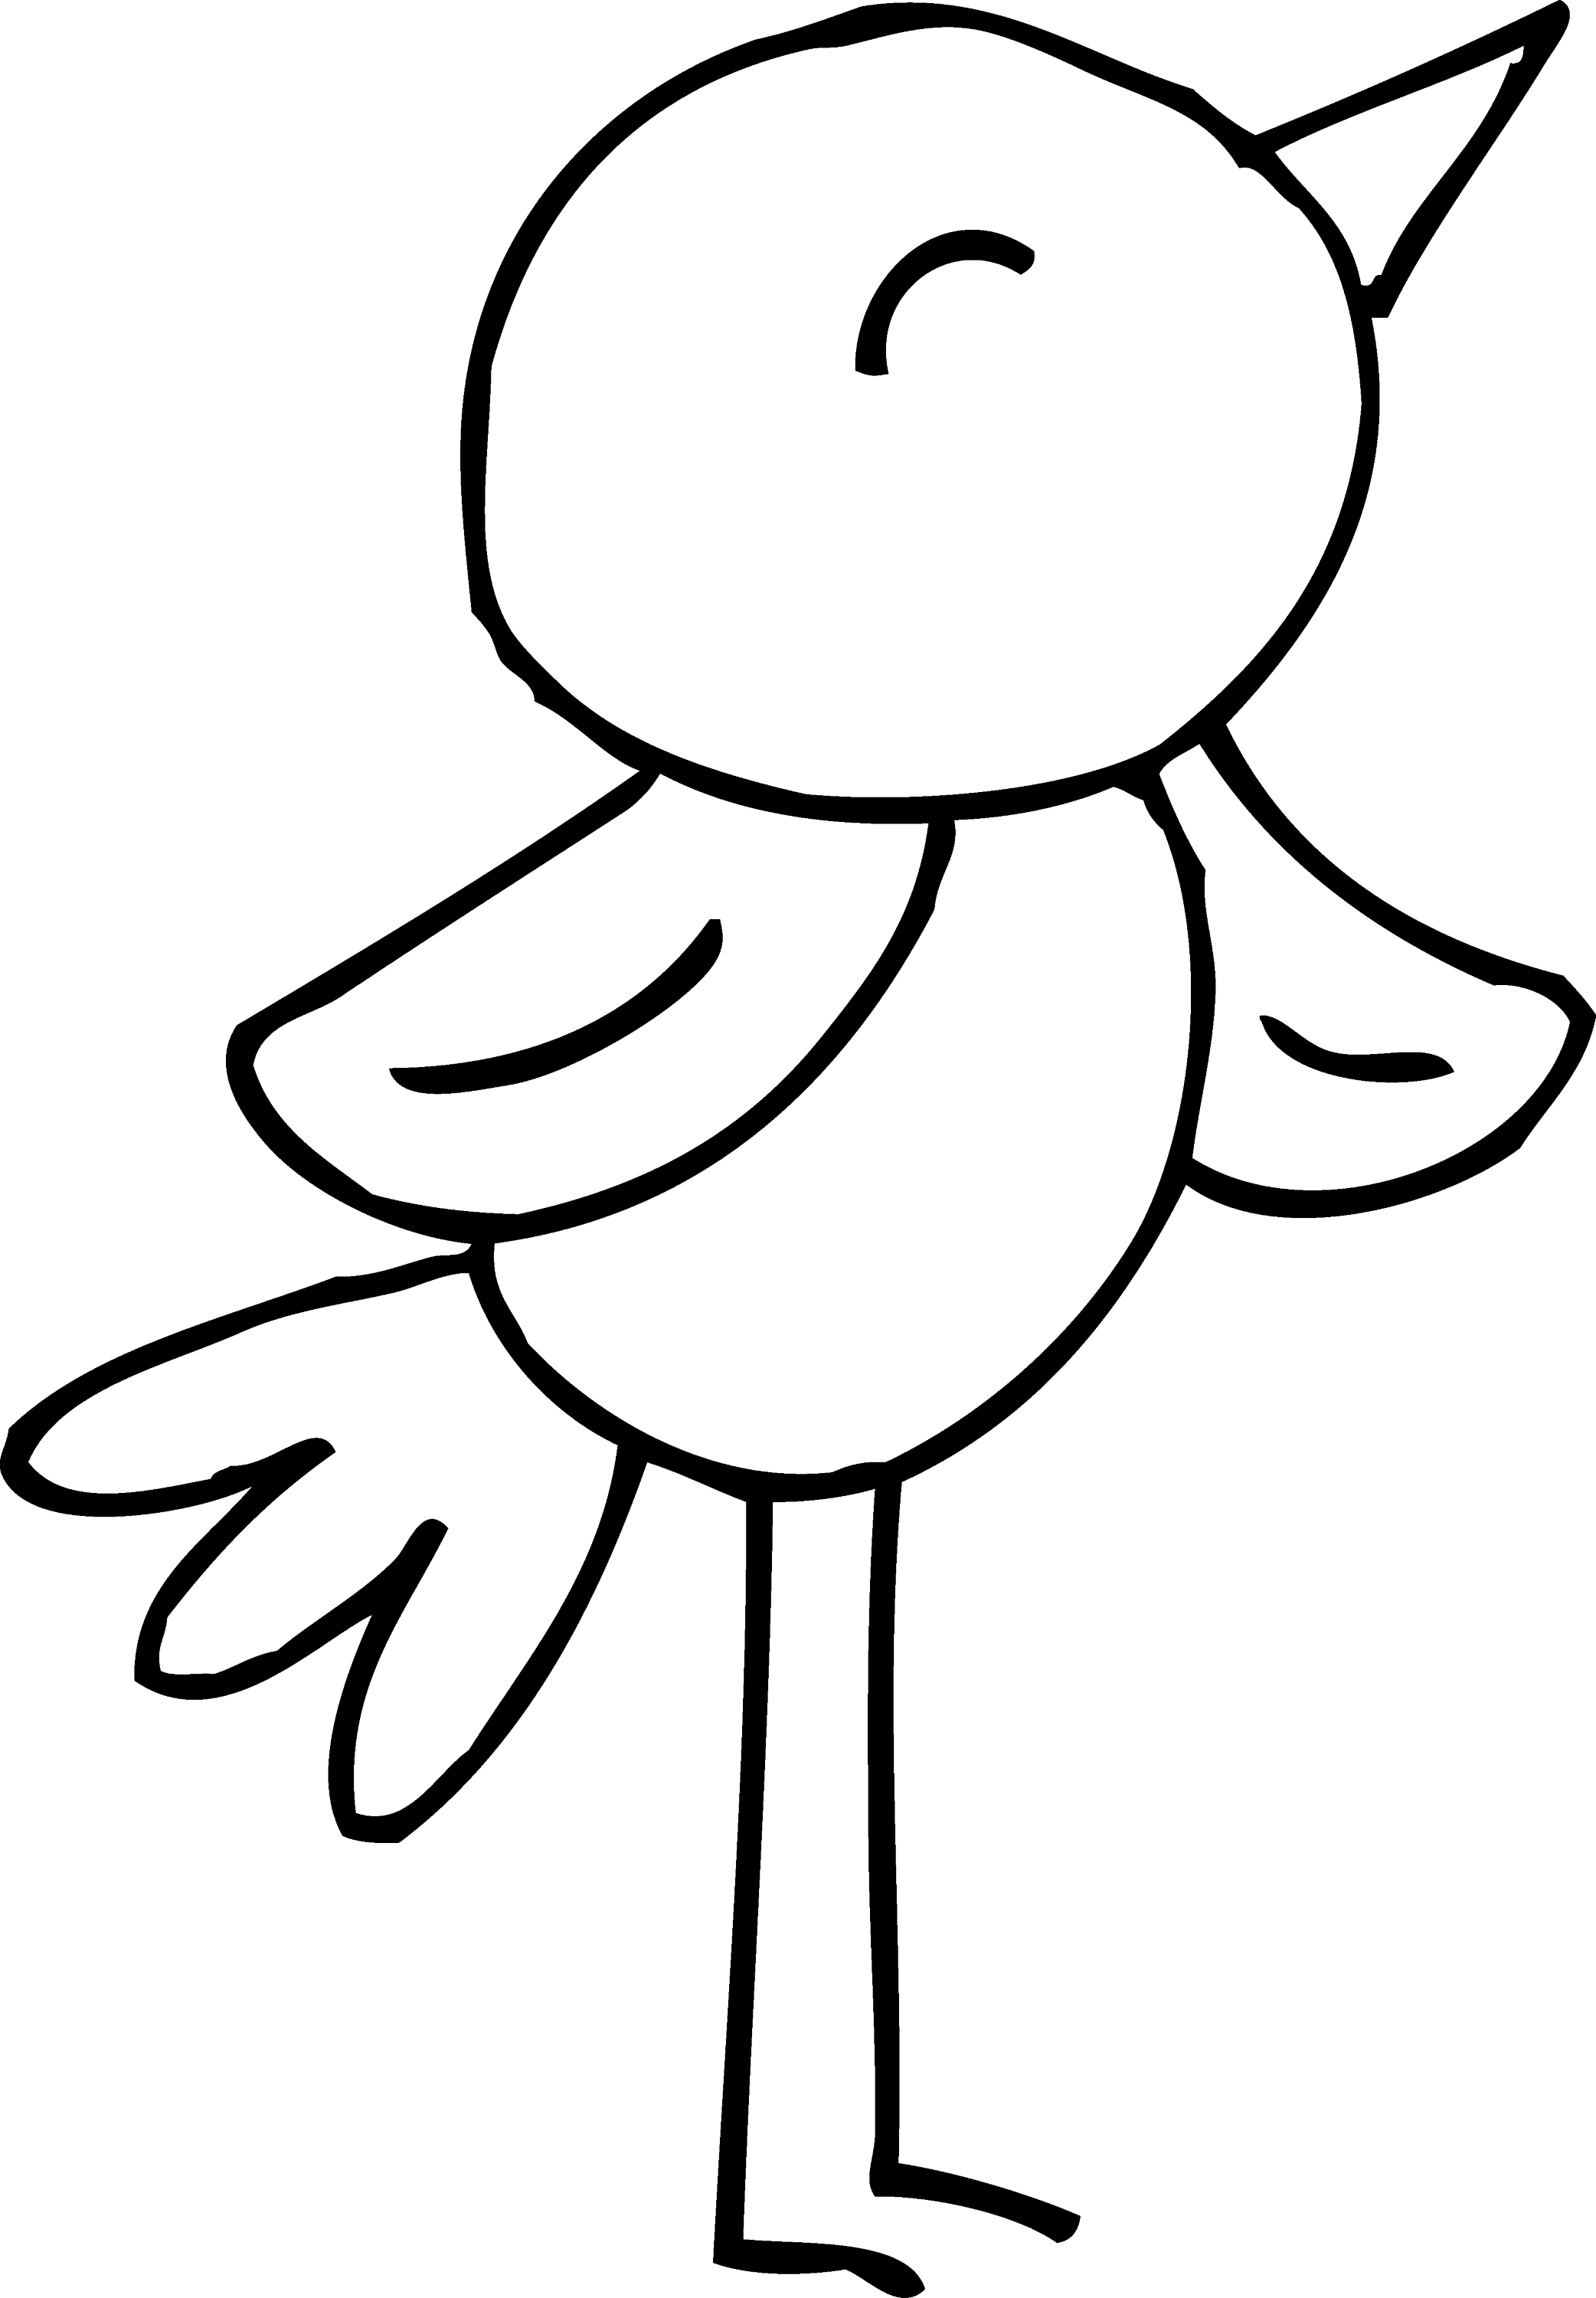 Spring Bird Coloring Page - Free Clip Art